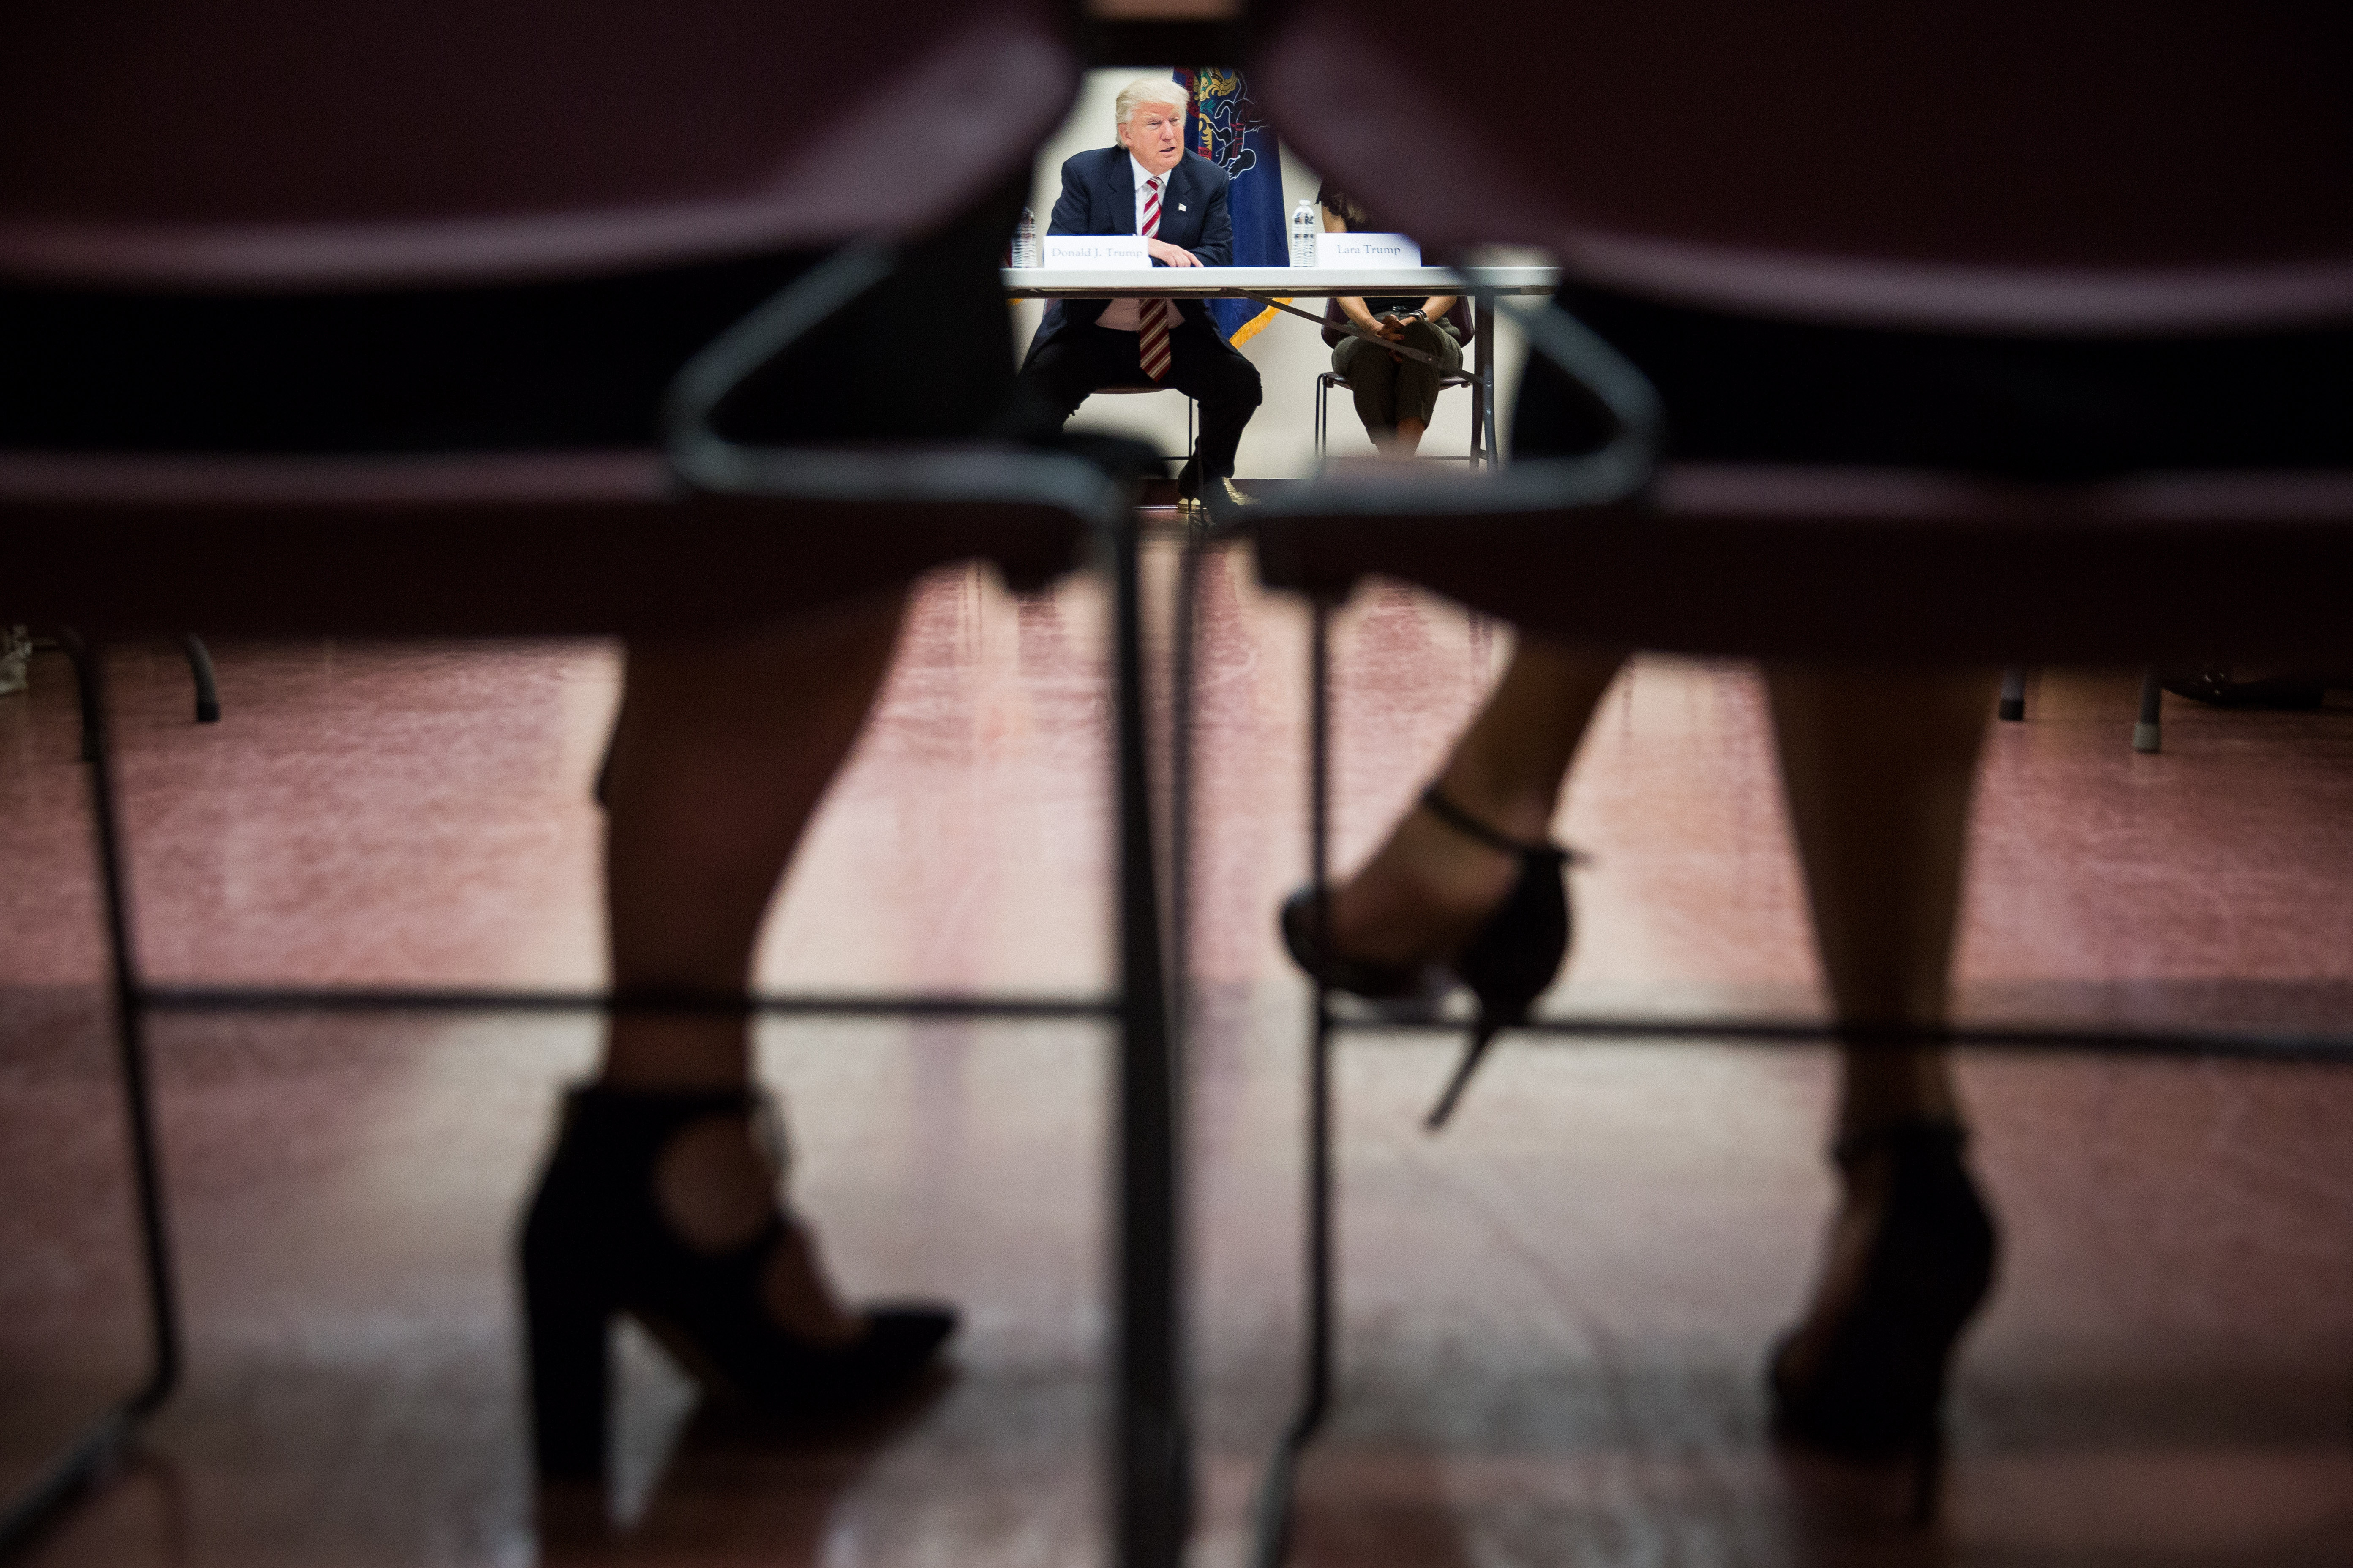 Donald Trump attends a roundtable discussion about child care issues before a campaign event in Aston, Pa., on Sept. 13, 2016.